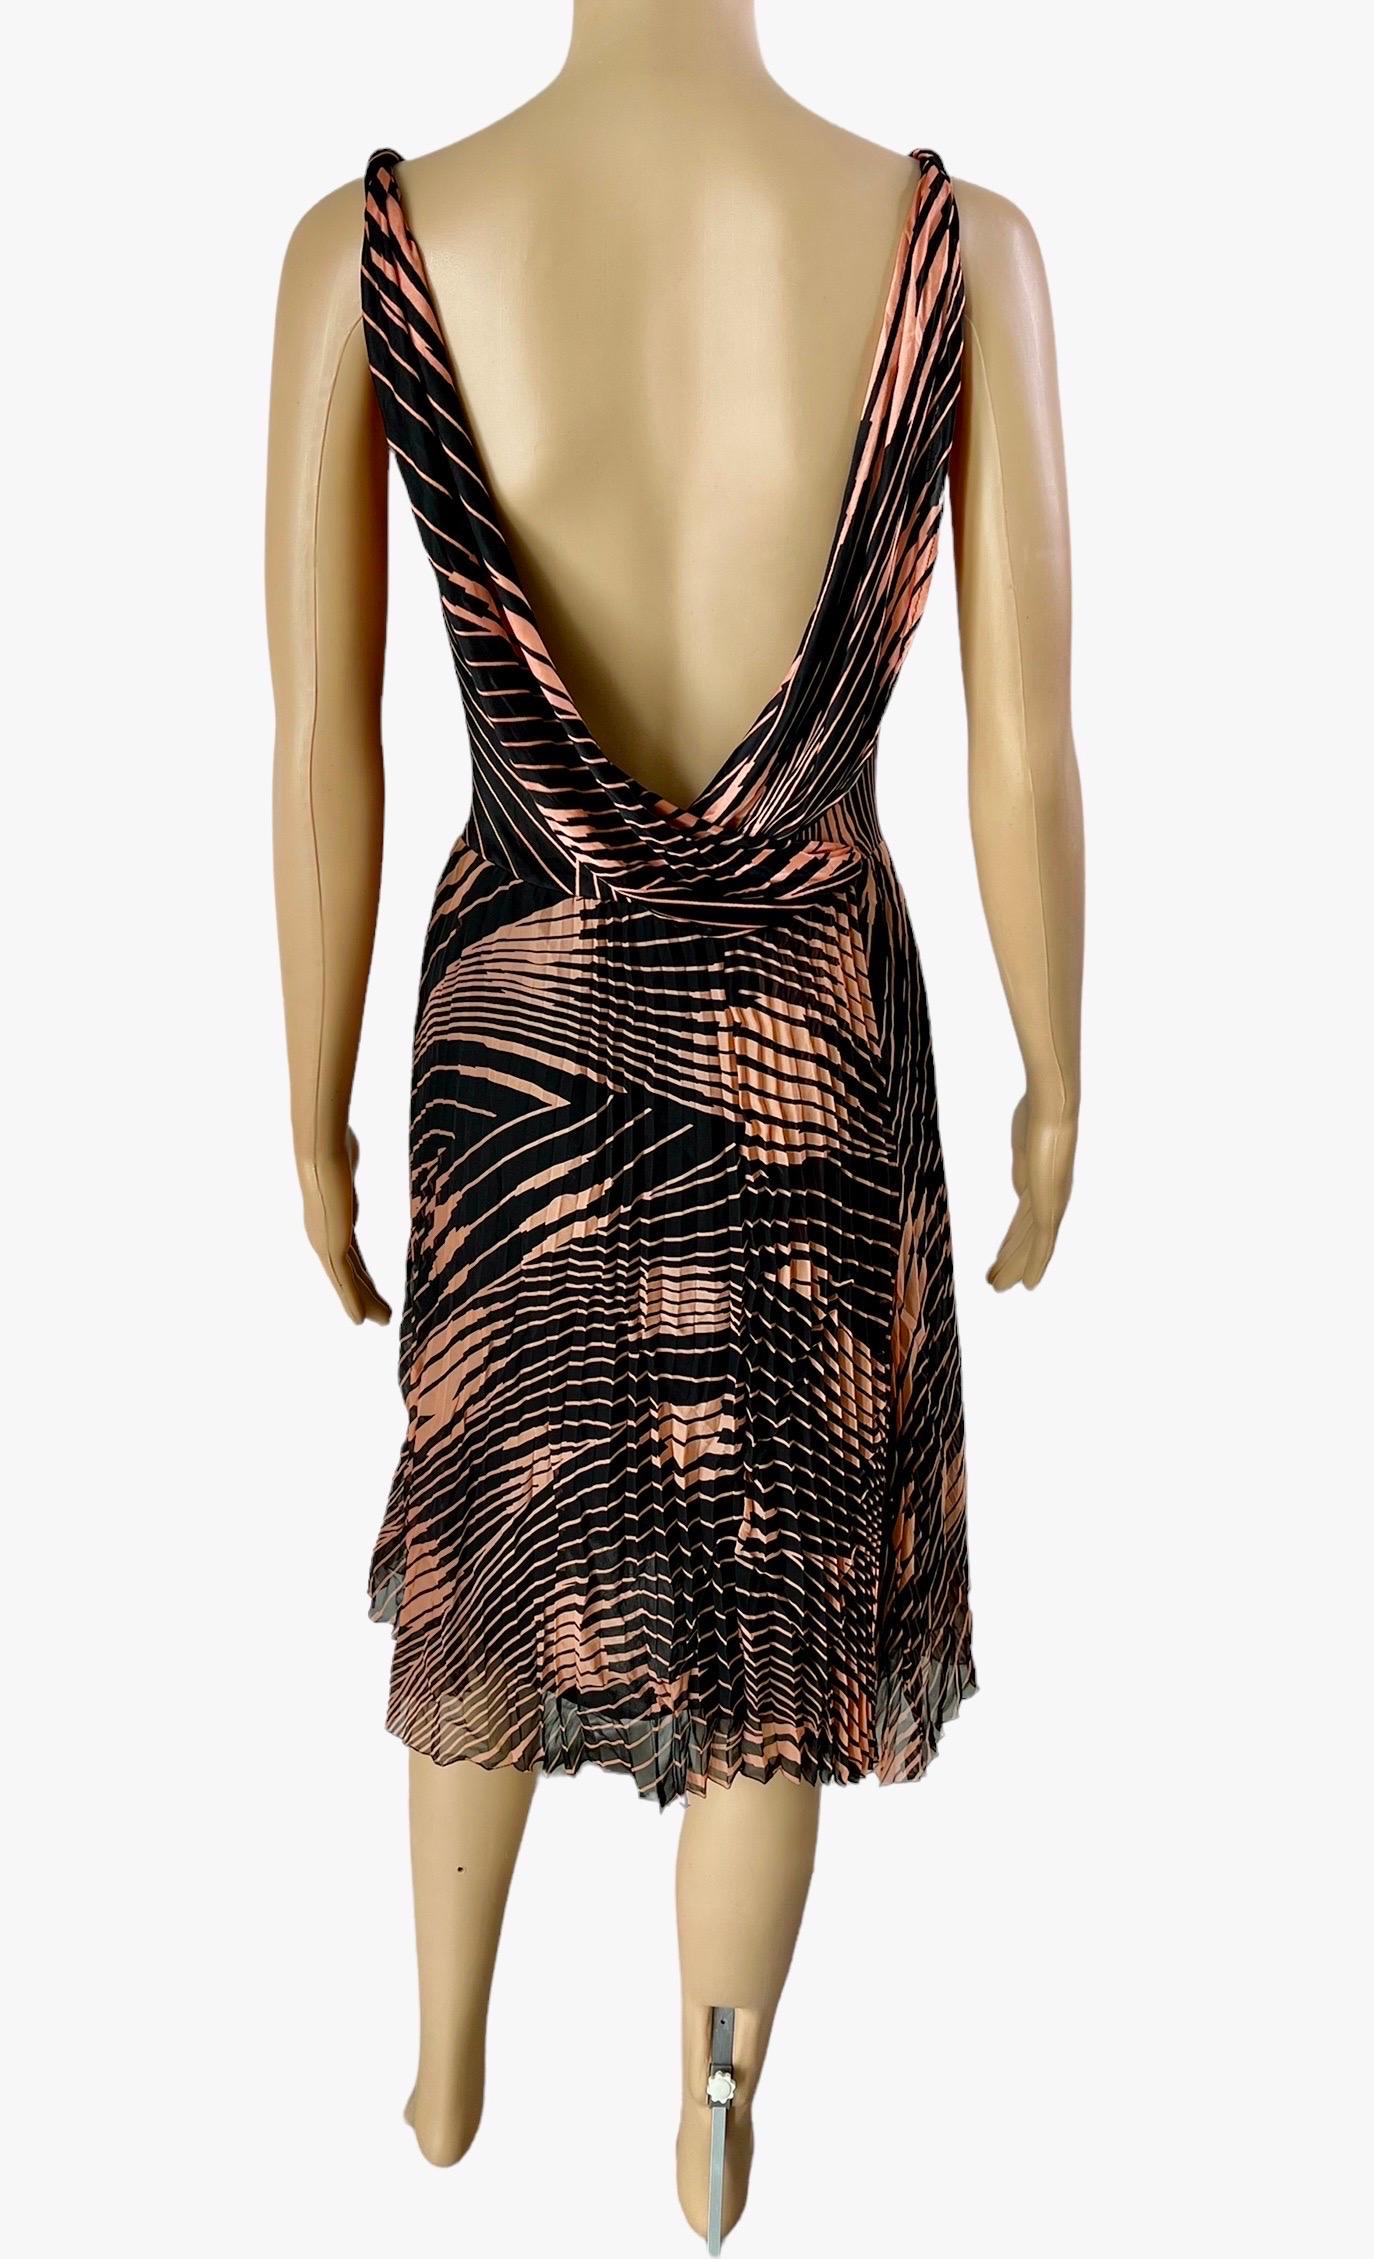 Black Gianni Versace c.2001 Plunged Bustier Open Back Geometric Abstract Print Dress For Sale